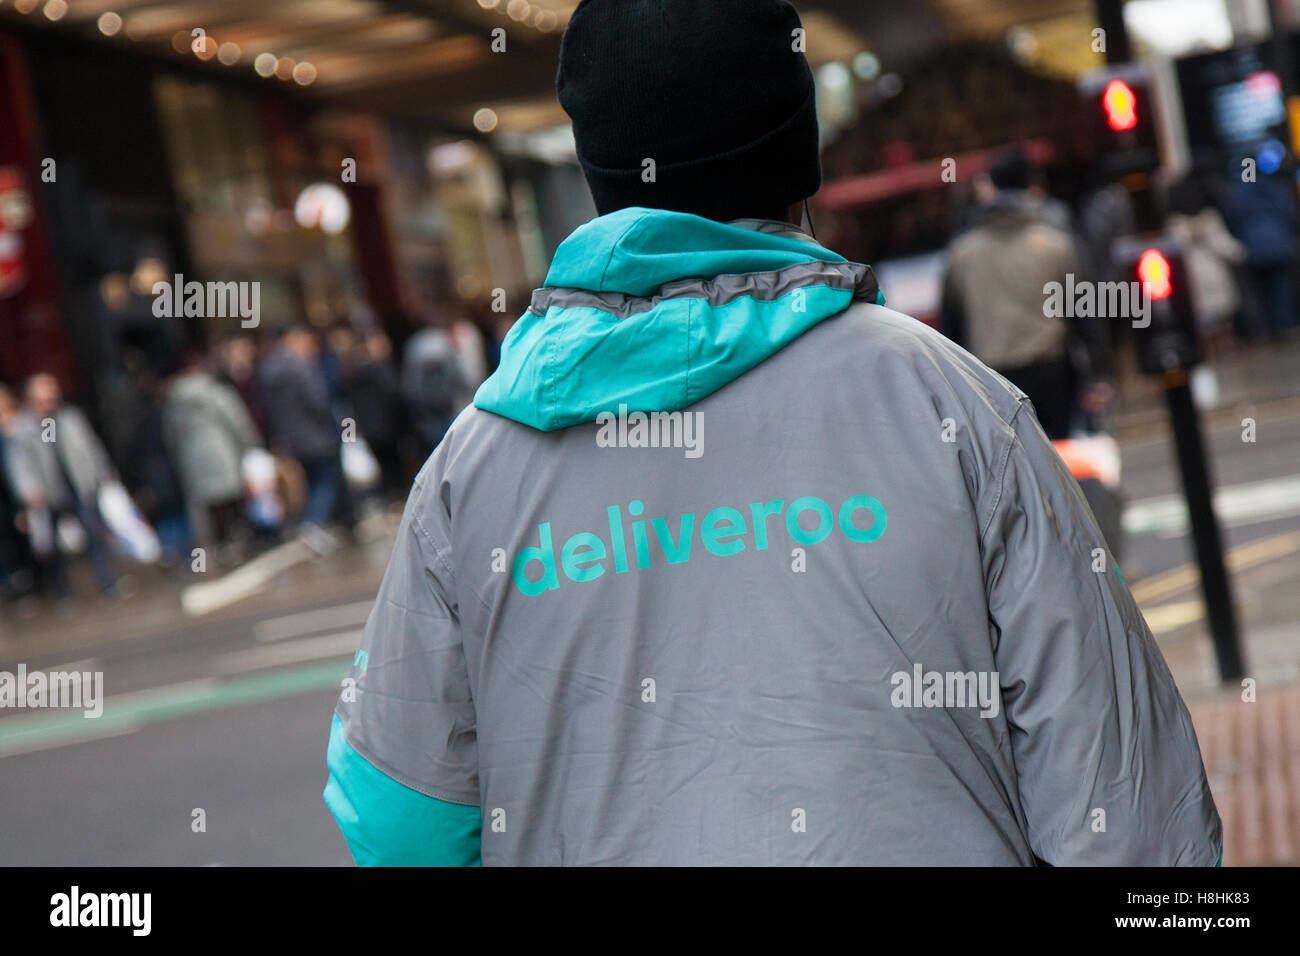 Deliveroo personnel in the Central Business District of Market Street, Manchester, UK Stock Photo